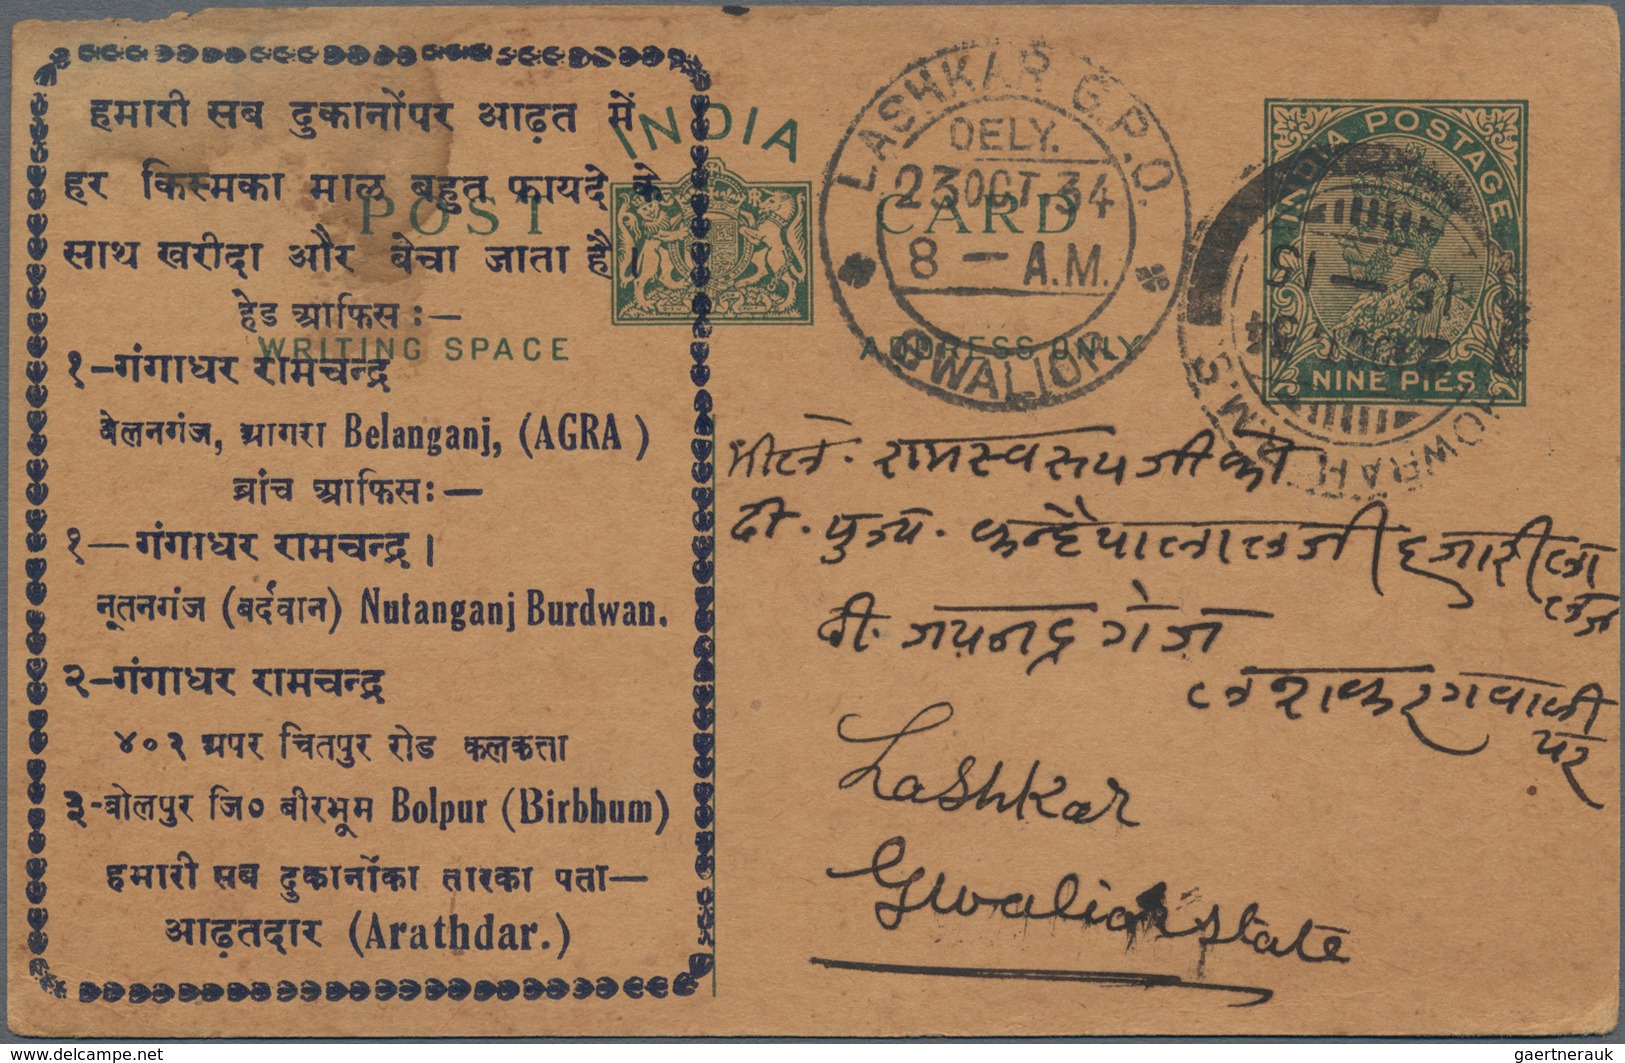 Indien - Ganzsachen: 1890's-1930's "Additional printings": Collection of 70 postal stationery cards